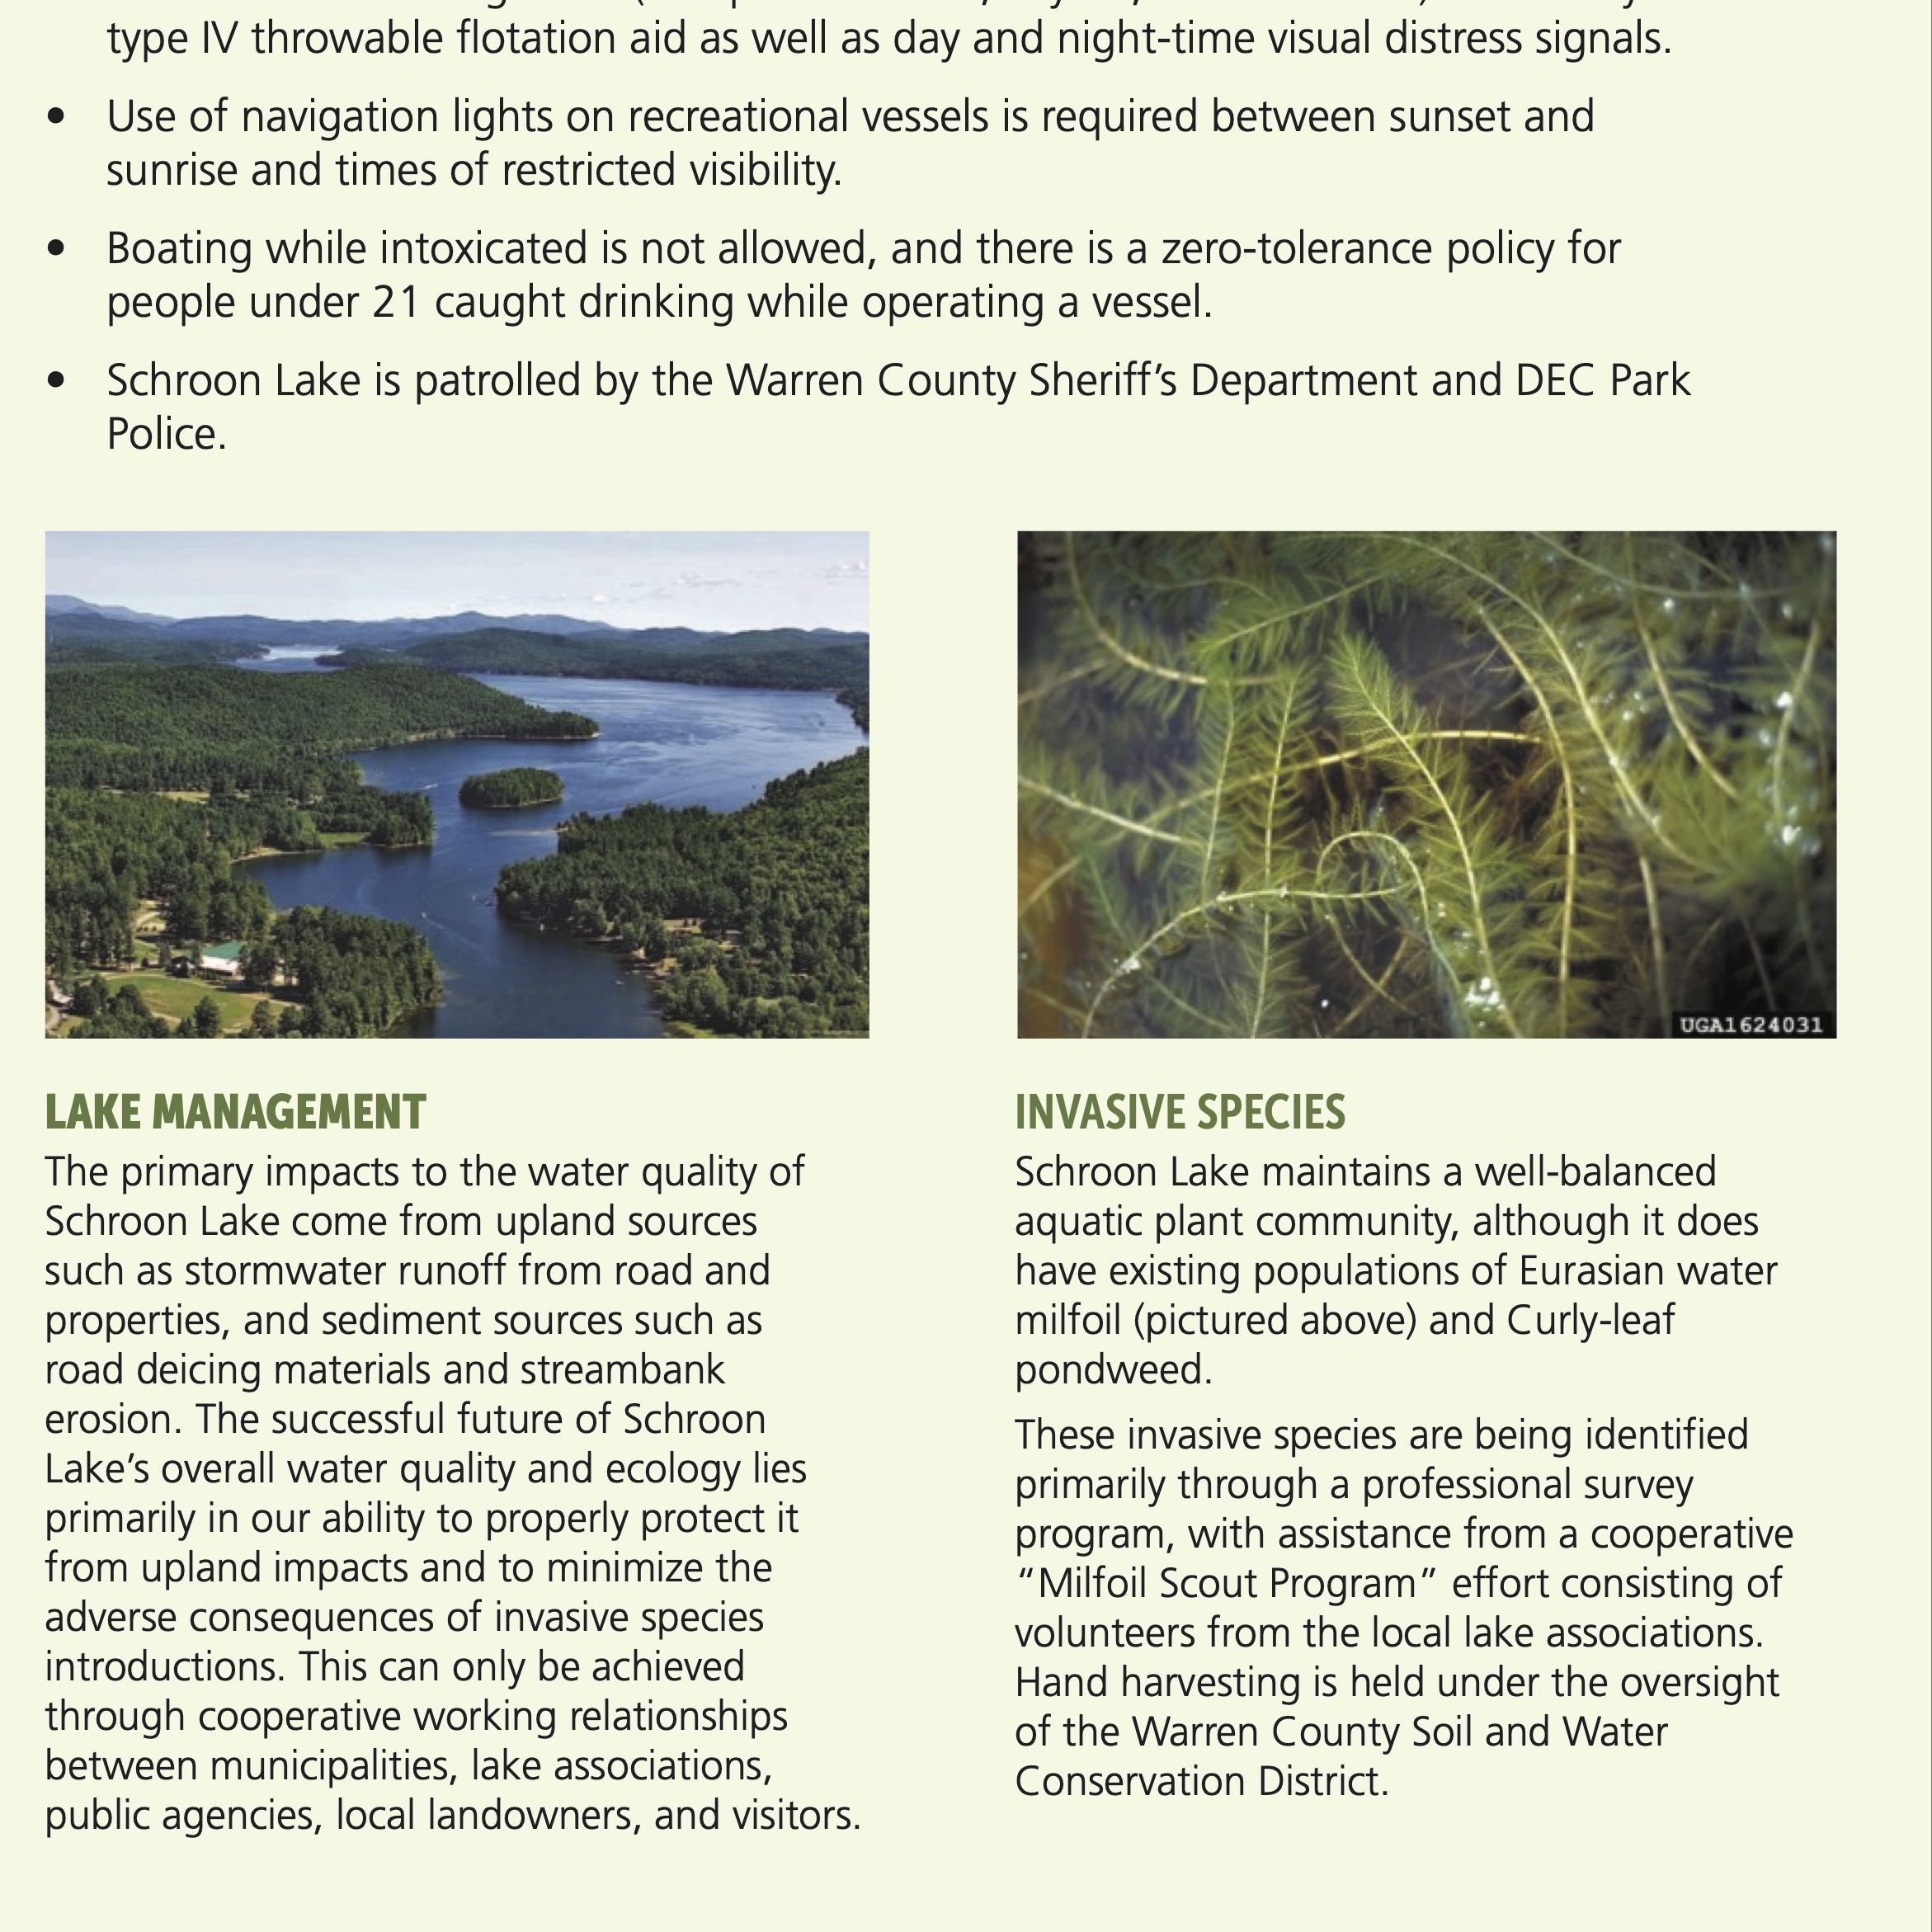 Schroon Lake Lake Management and Invasive Species